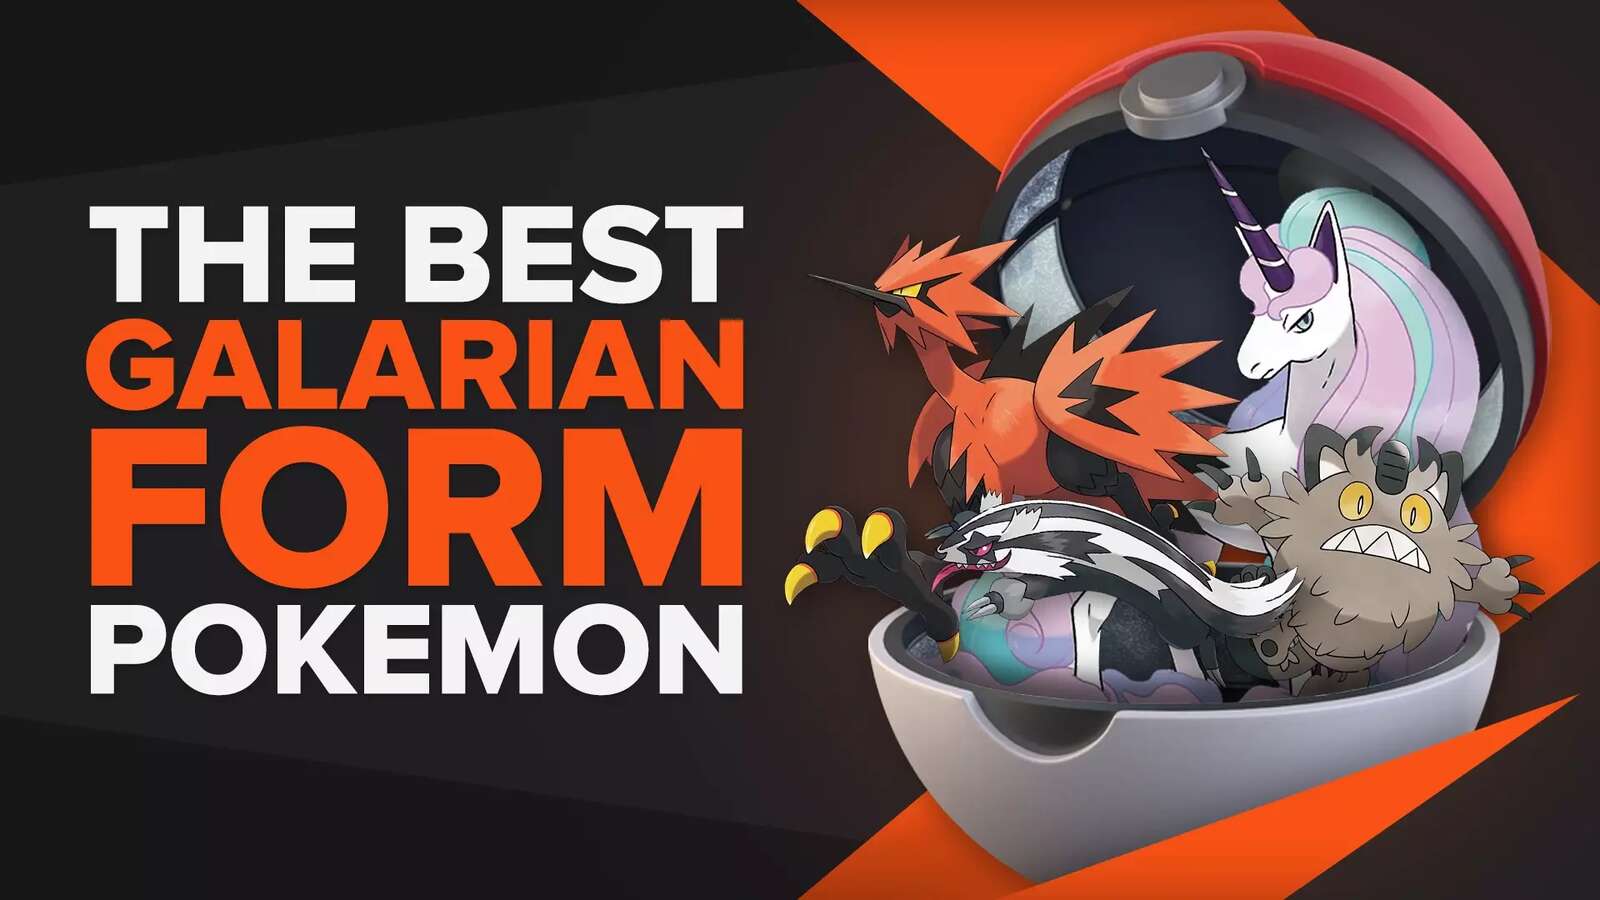 Best Galarian Form Pokemon [Top 10 Ranked]